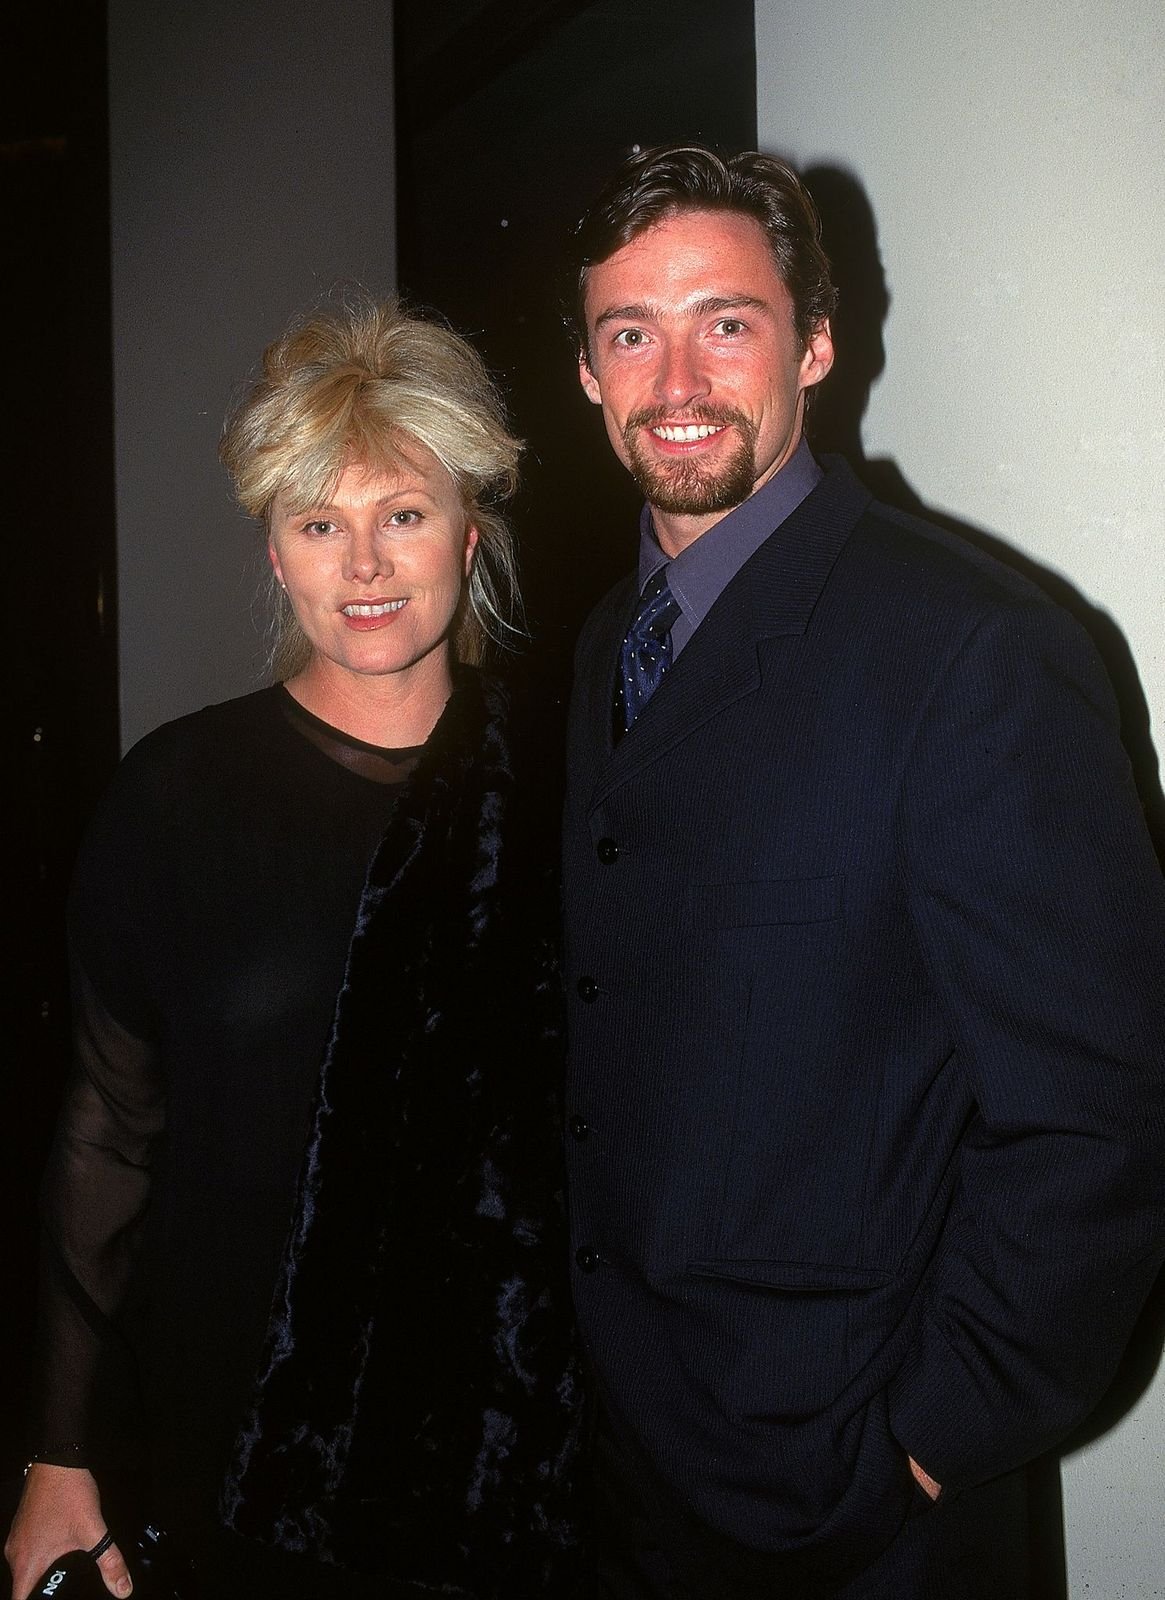 Deborra-Lee Furness and Hugh Jackman at the Variety Club Heart Awards on July 18, 1997, in Sydney, Australia | Photo: Getty Images